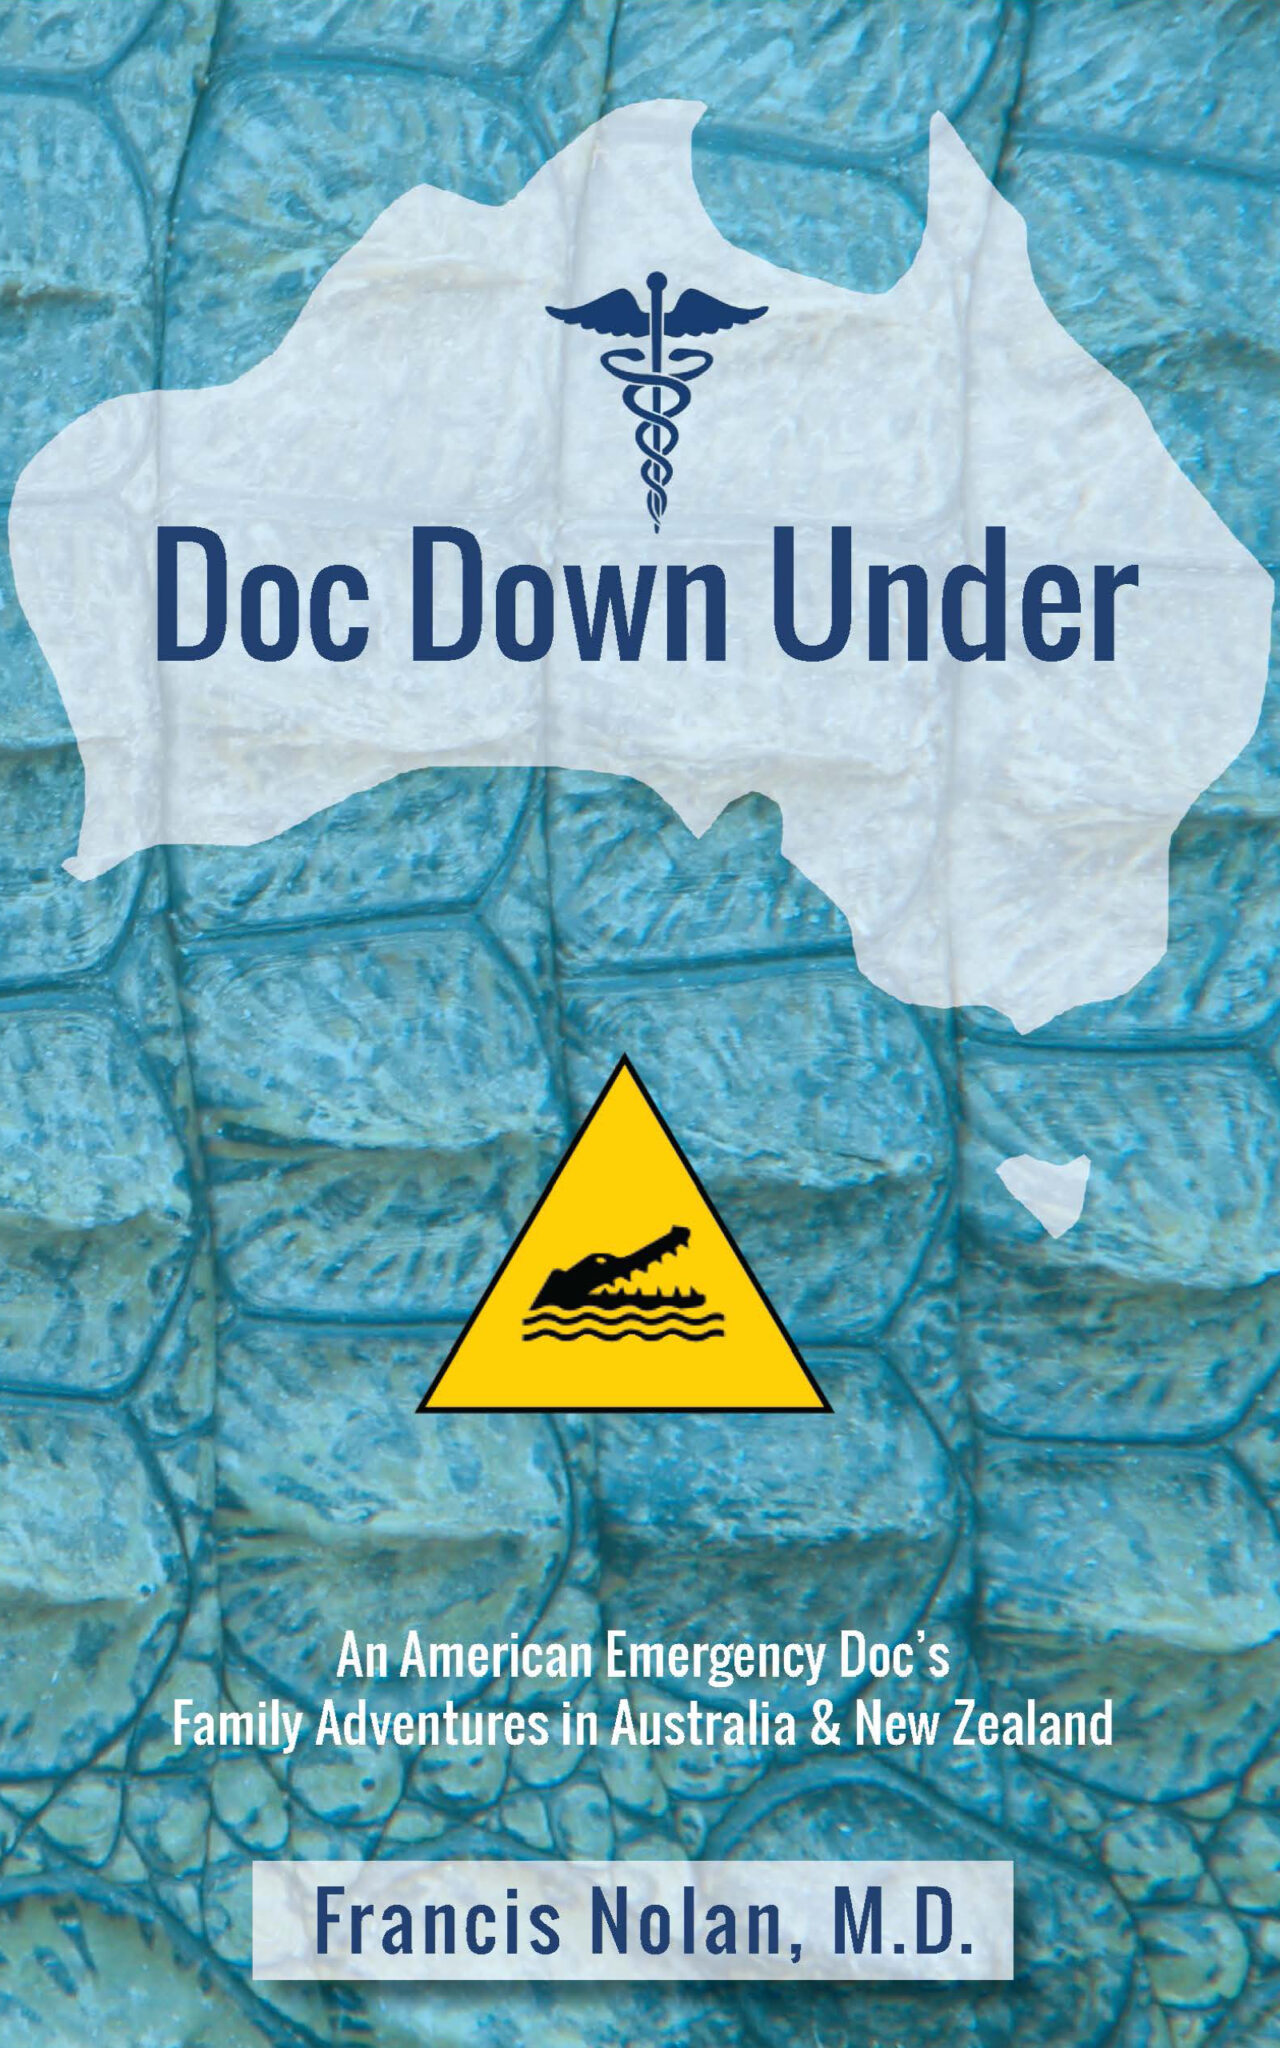 "Doc Down Under" Cover